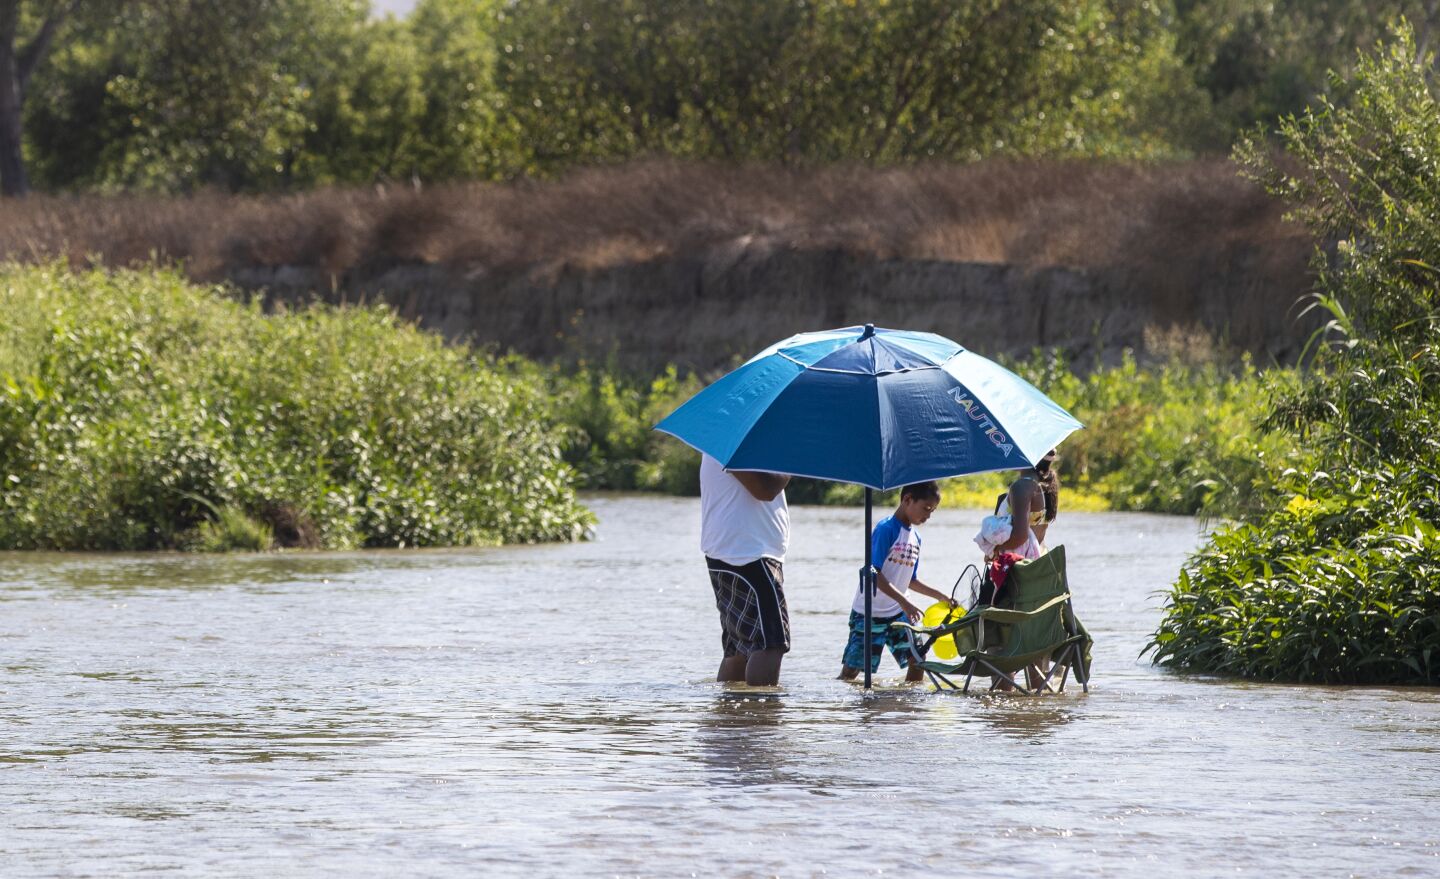 A family cools off in the Santa Ana river